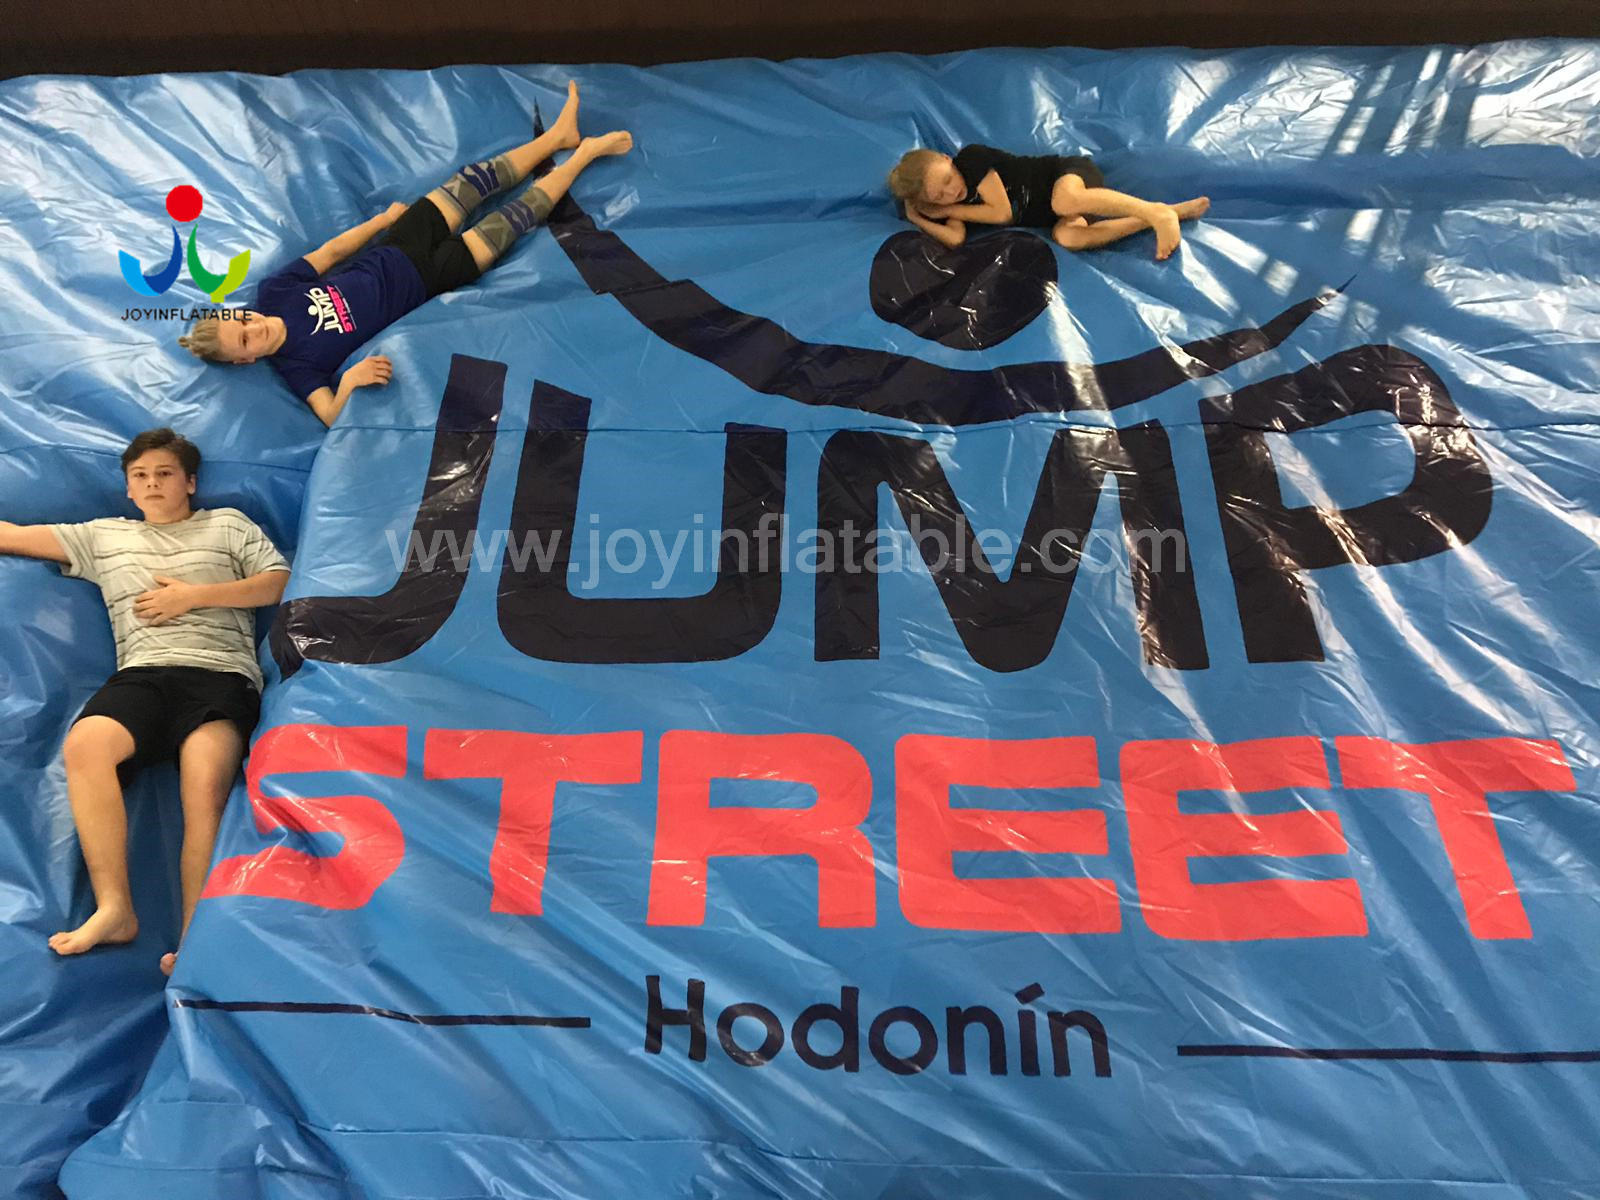 JOY inflatable bag jump airbag factory for skiing